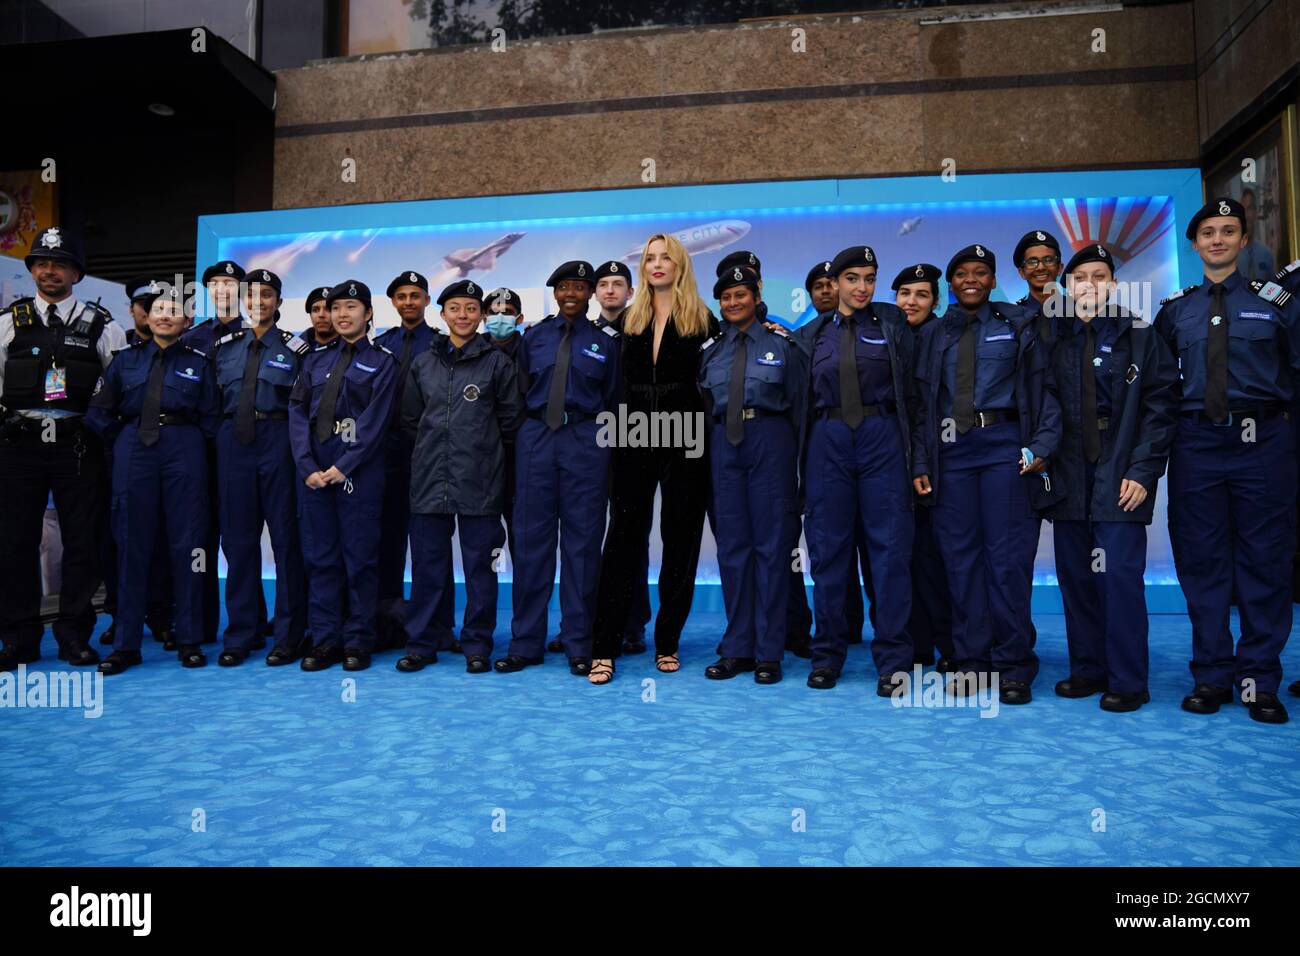 https://c8.alamy.com/comp/2GCMXY7/jodie-comer-alongside-police-cadets-at-cineworld-leicester-square-central-london-for-the-premiere-of-free-guy-picture-date-monday-august-9-2021-2GCMXY7.jpg